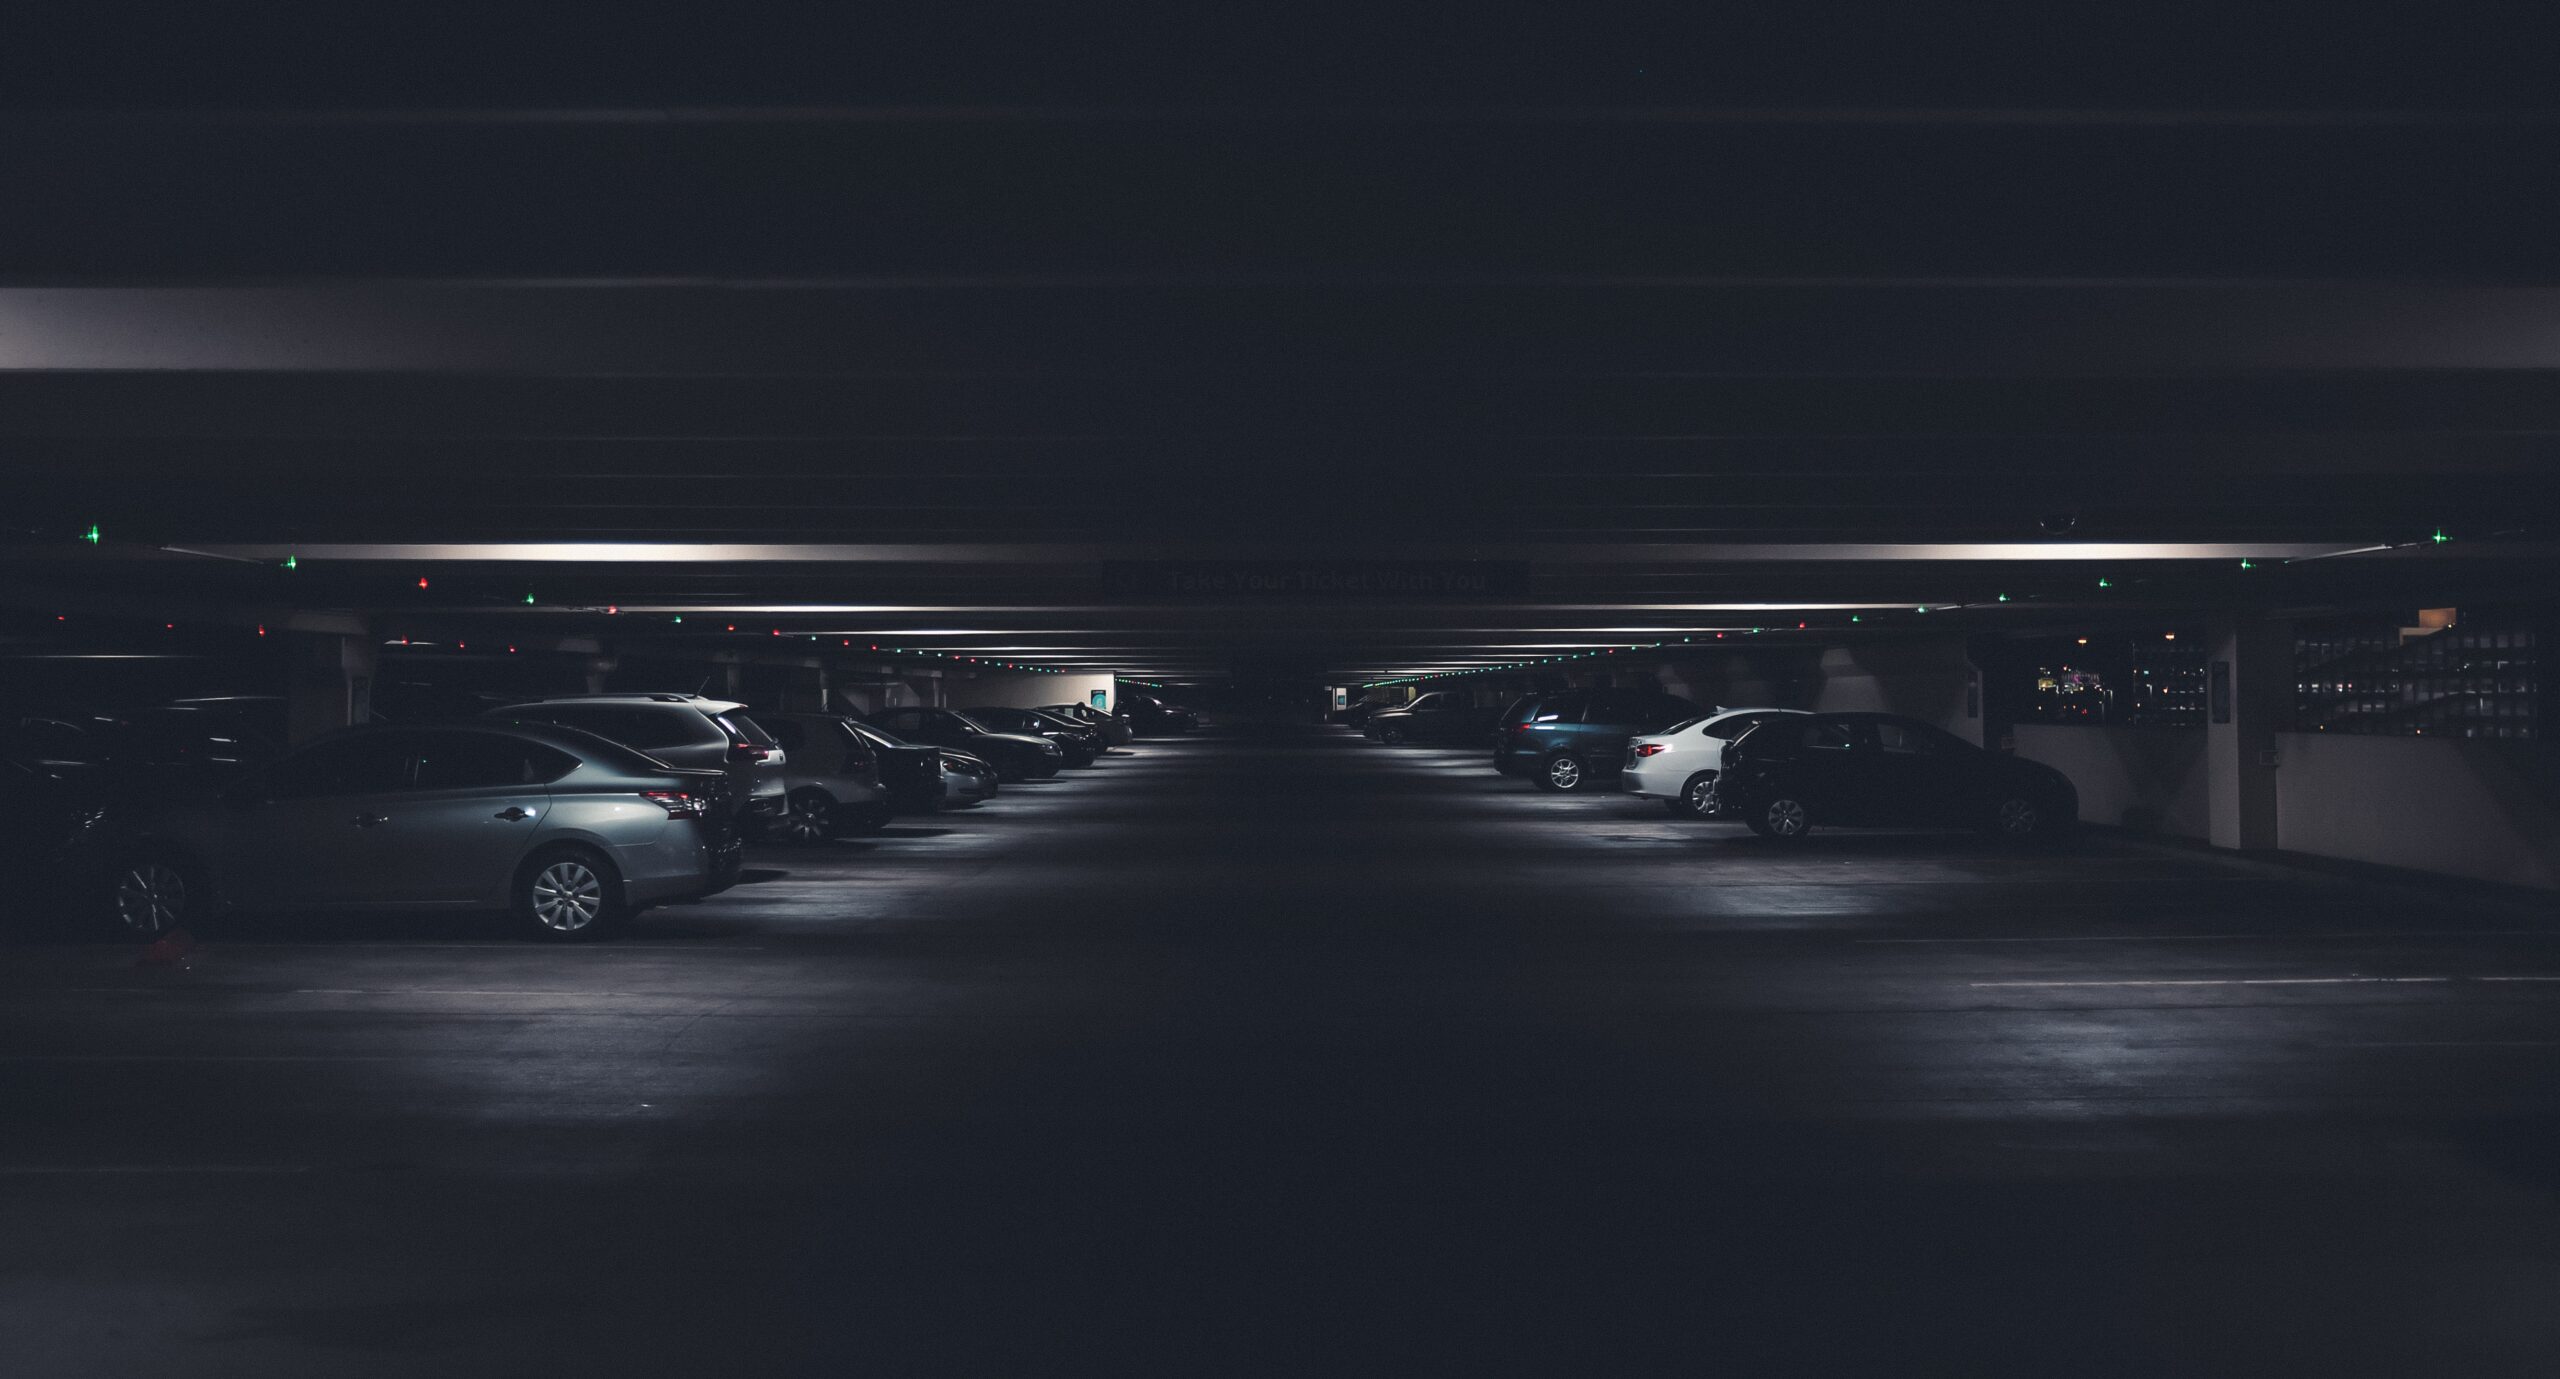 background image of a freshly cleaned parking garage